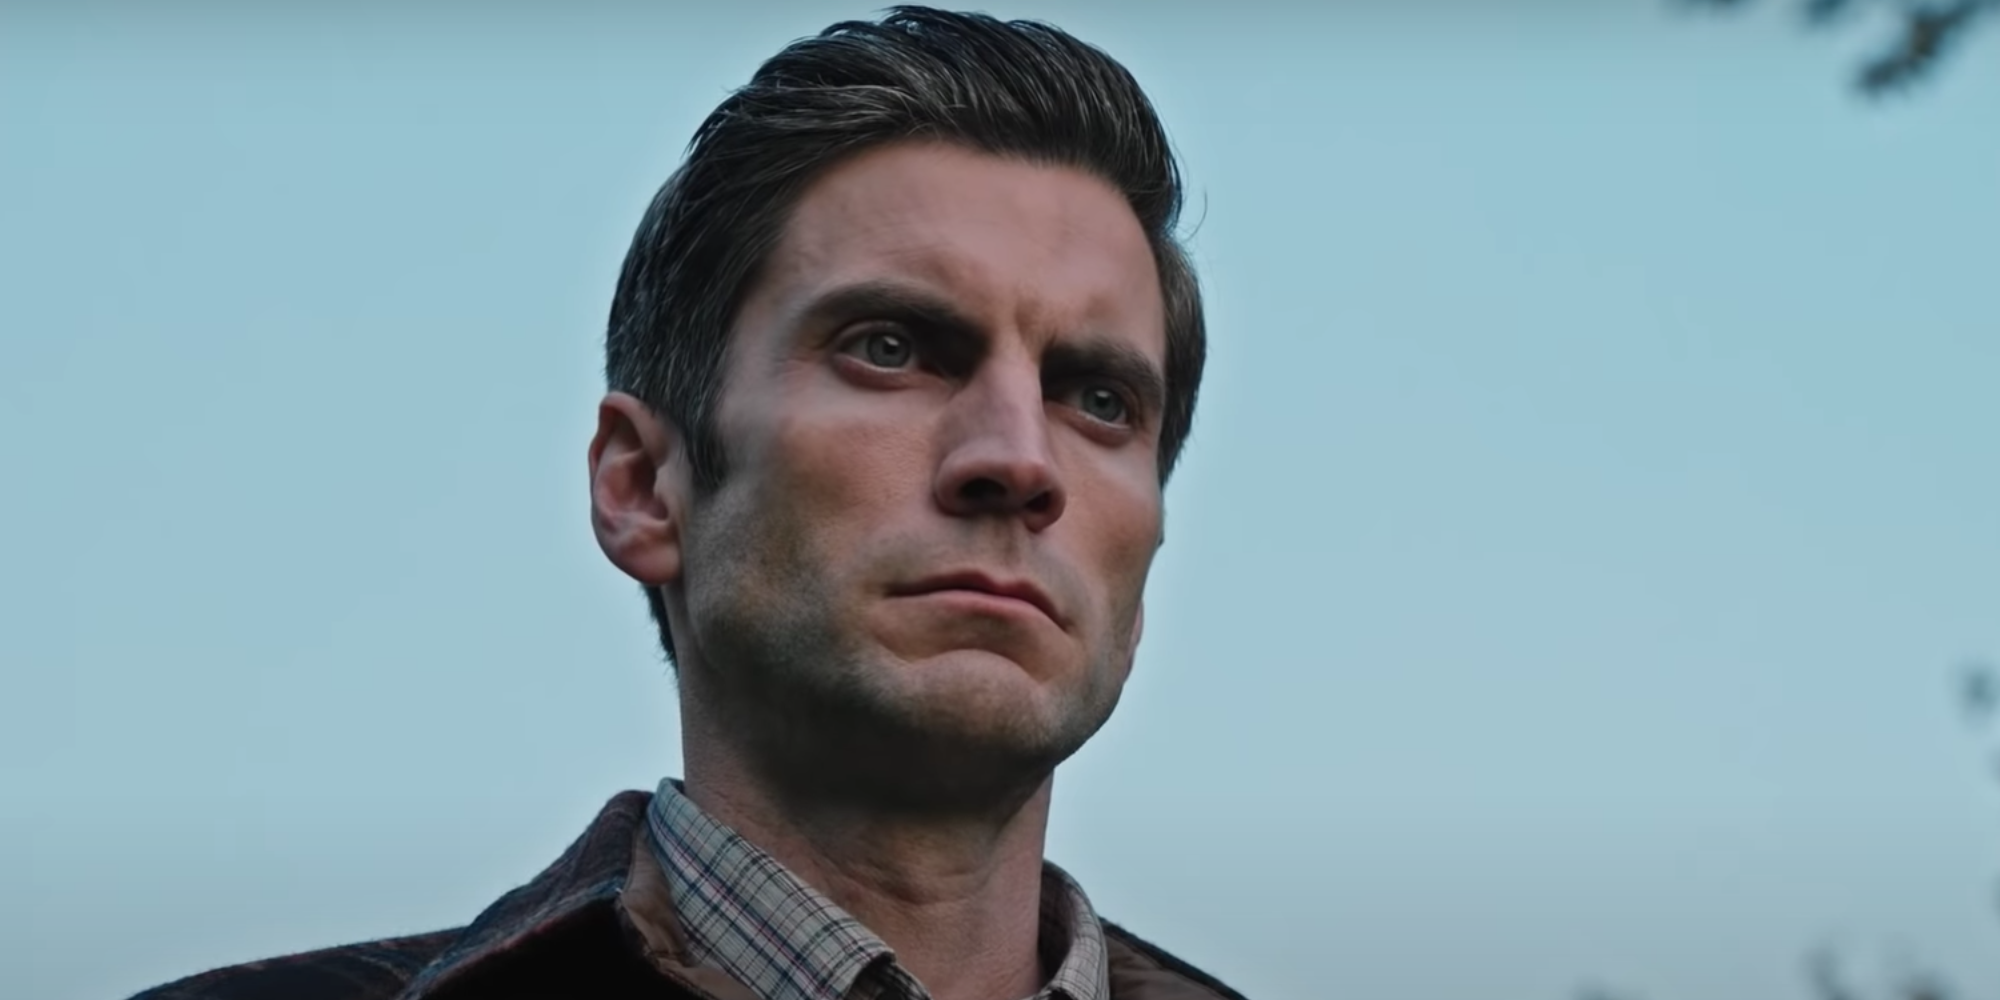 Jamie Dutton (played by Wes Bentley) stares grimly in Yellowstone